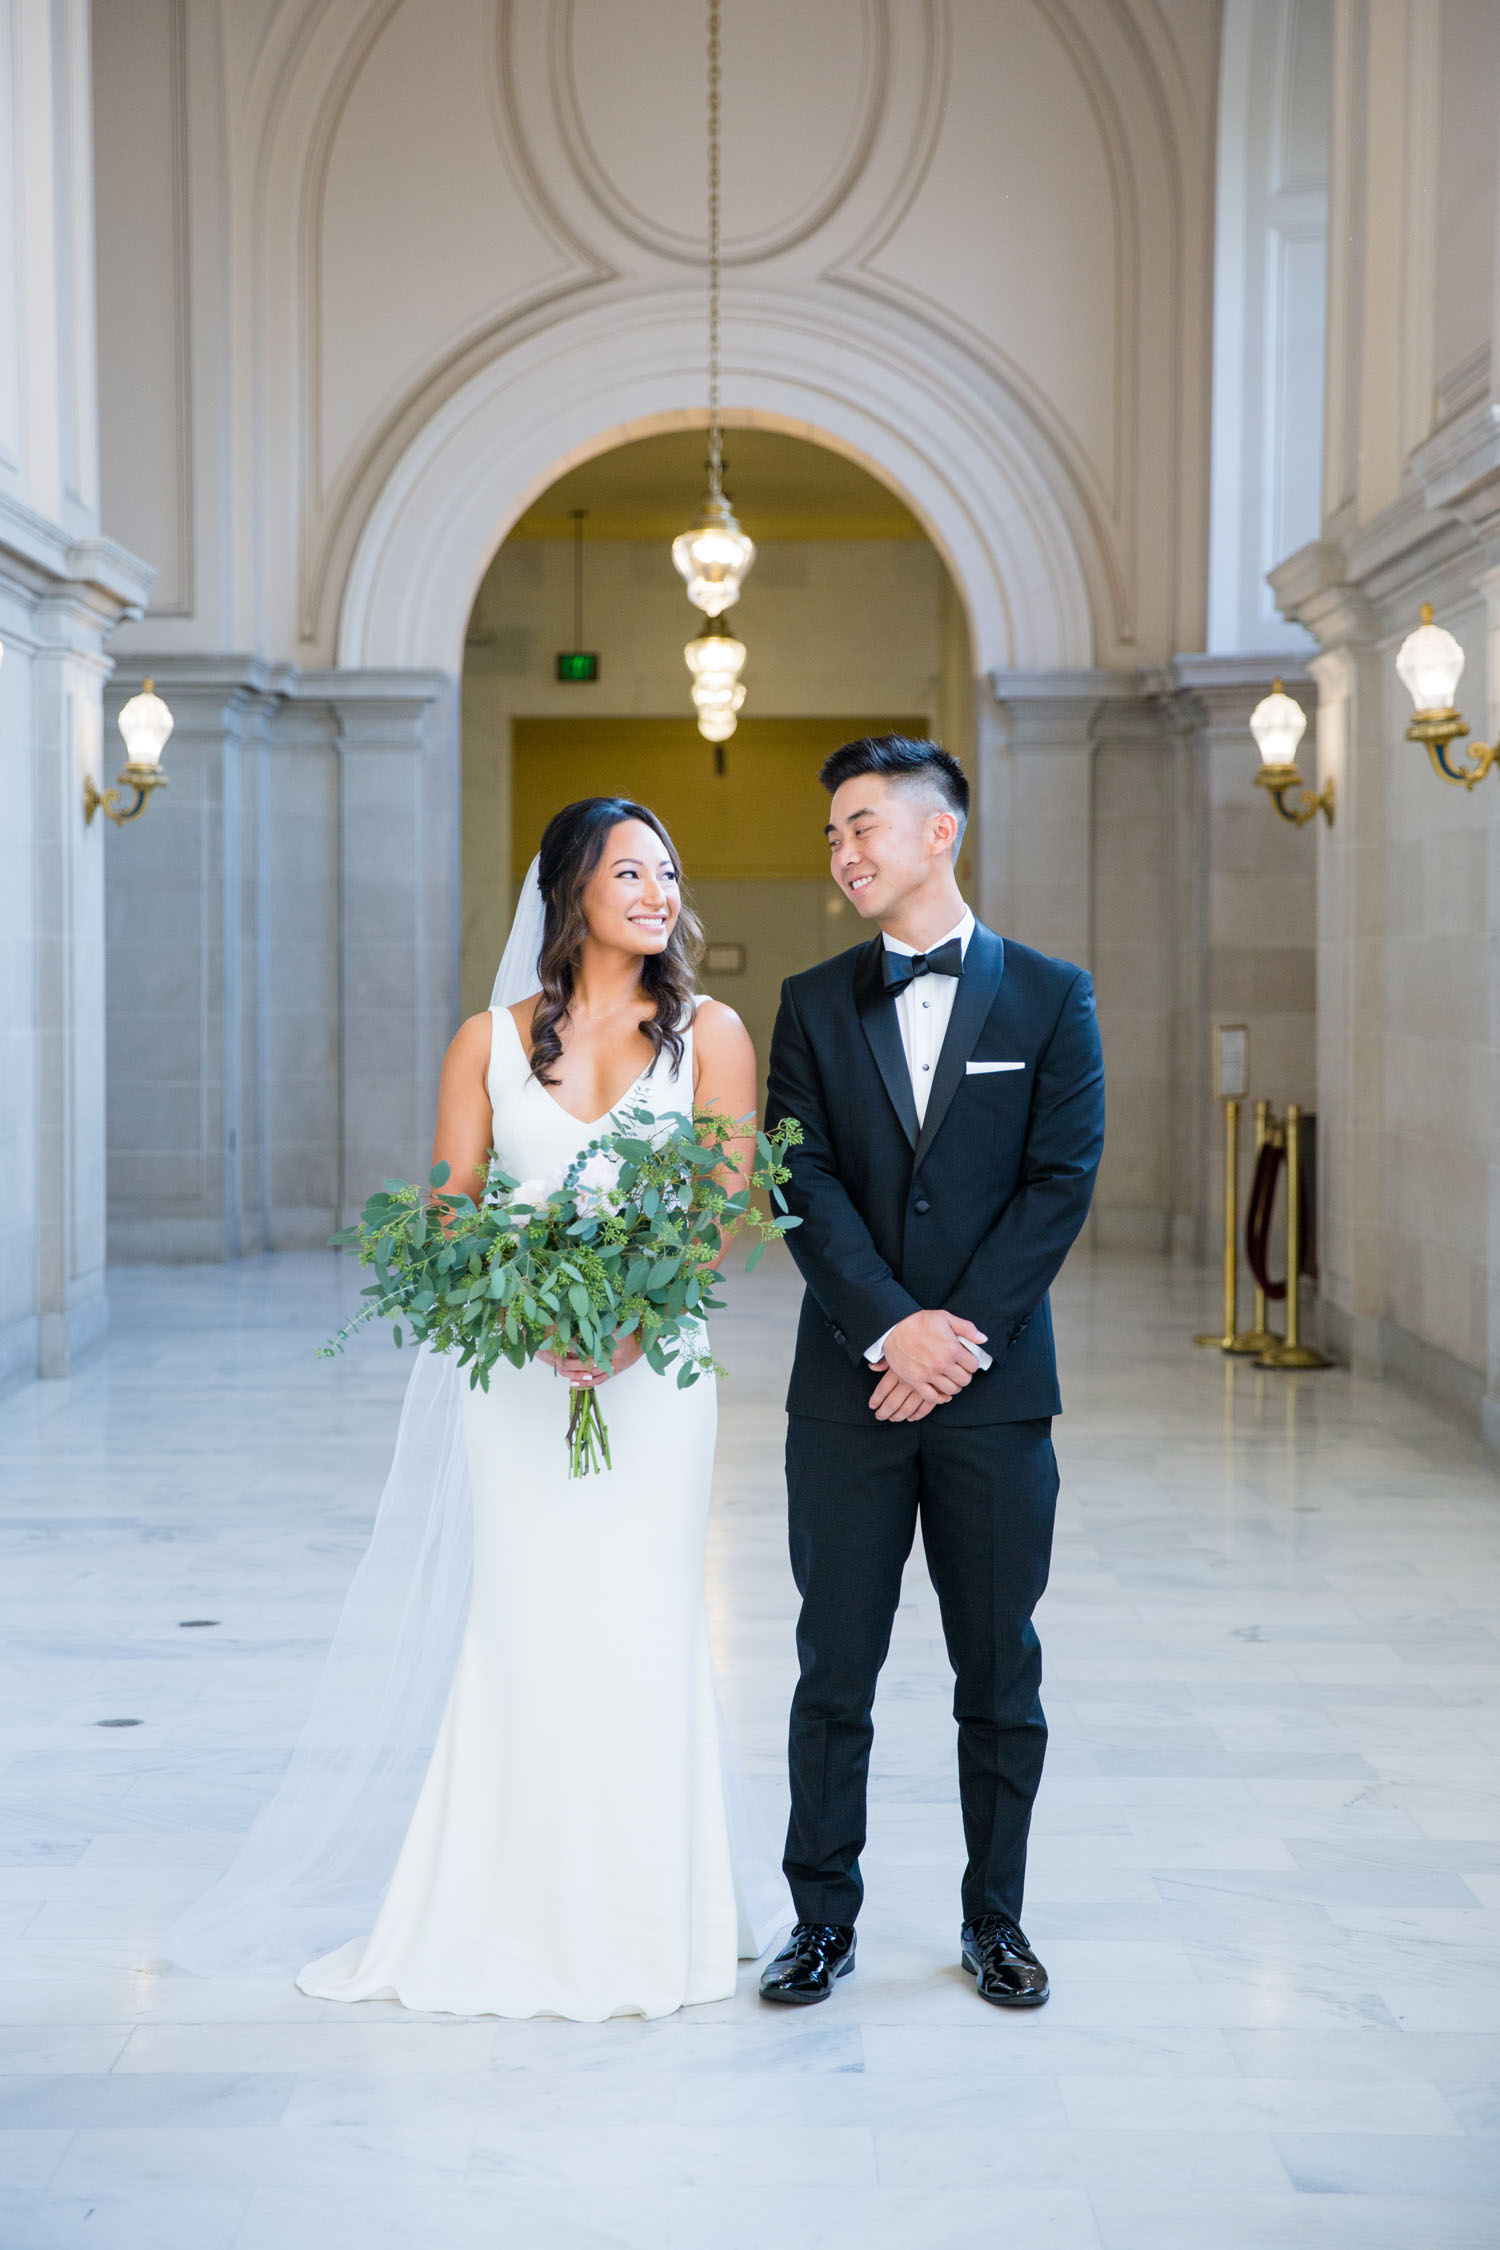 Getting Married at San Francisco City Hall